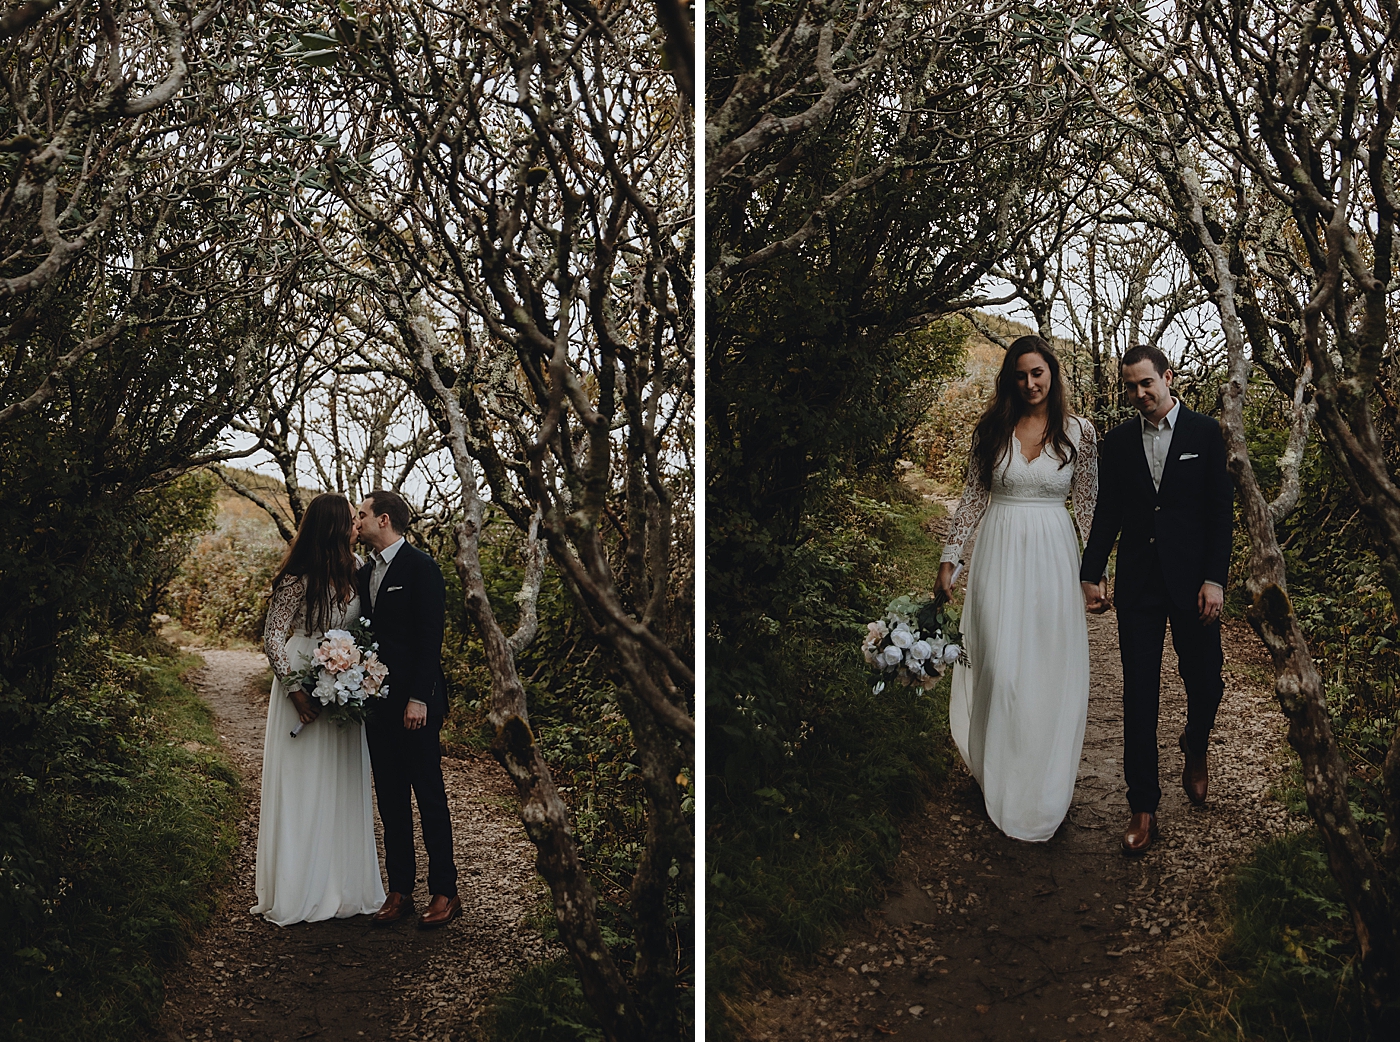 Bride and Groom walking and kissing down natural path with tree arches Catawba Falls Asheville, NC Elopement Photography captured by Maggie Alvarez Photography